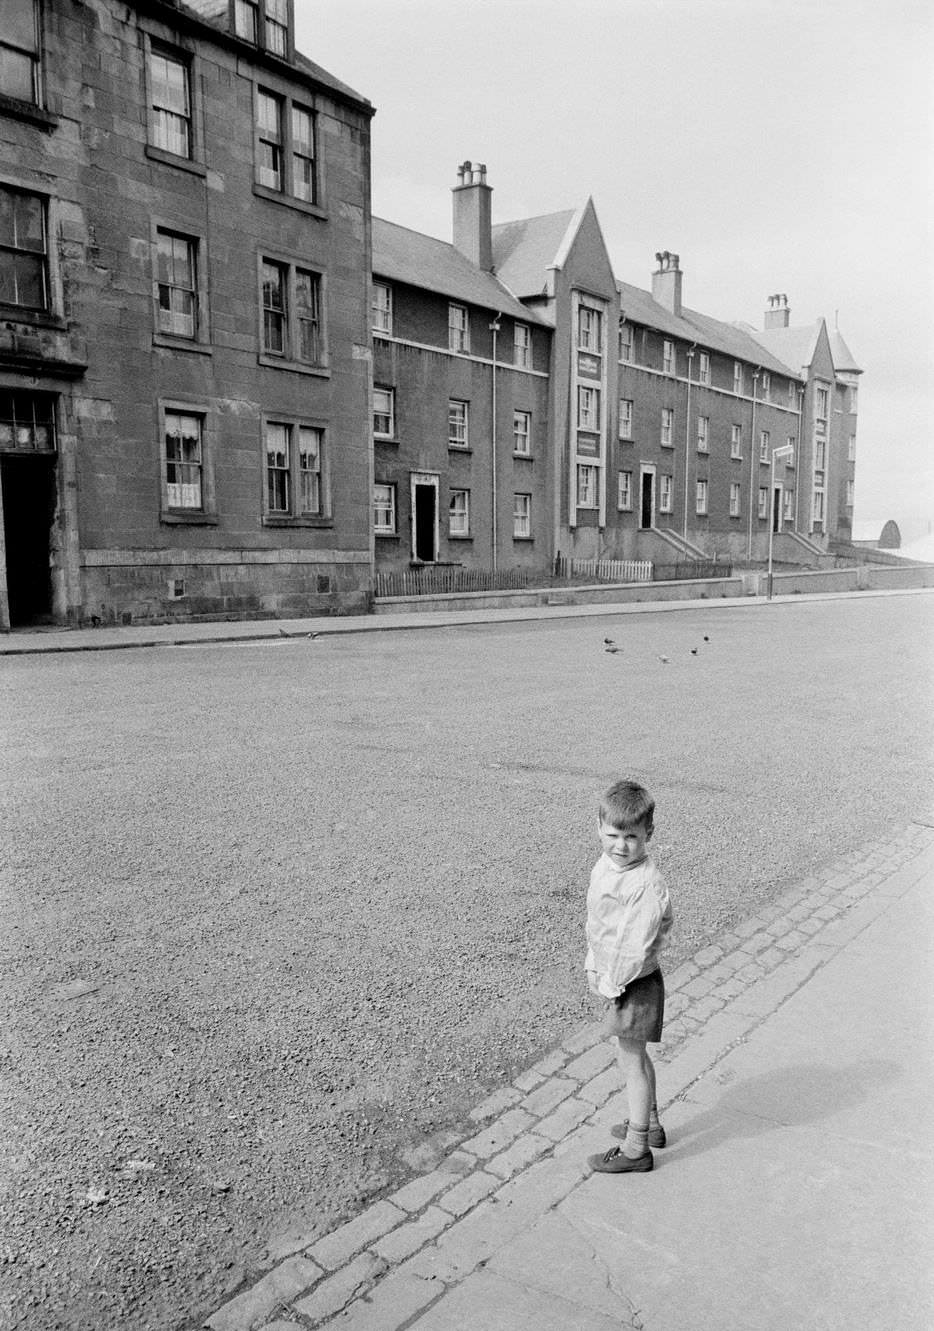 A boy in a street in the shipbuilding town of Greenock on the Clyde, Scotland, 1963.